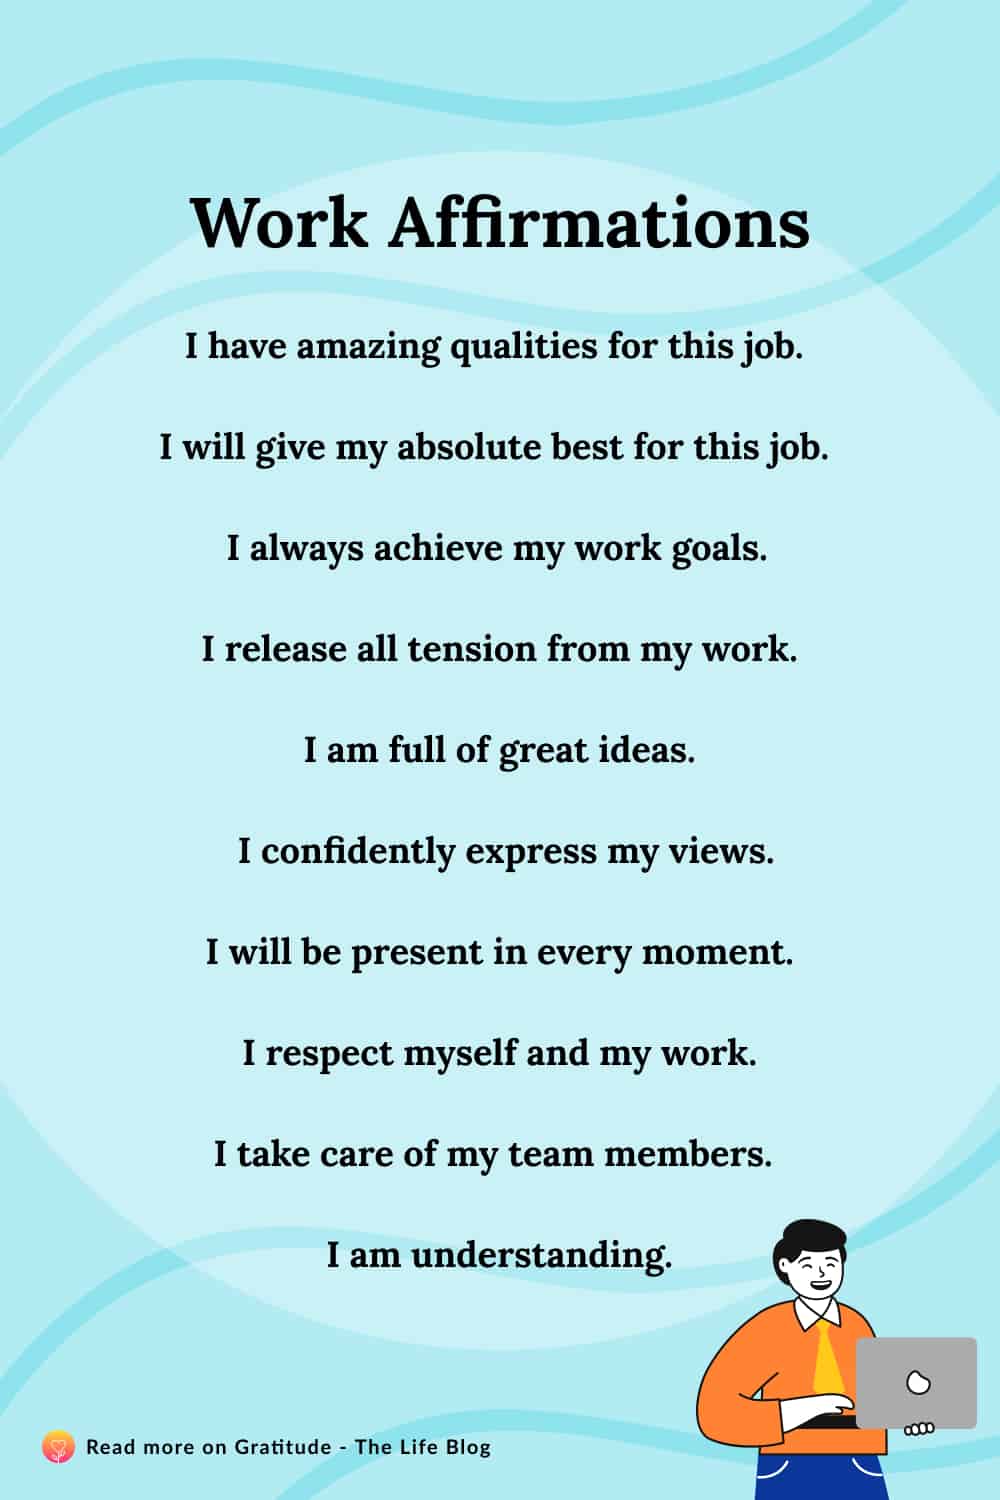 Image with list of work affirmations